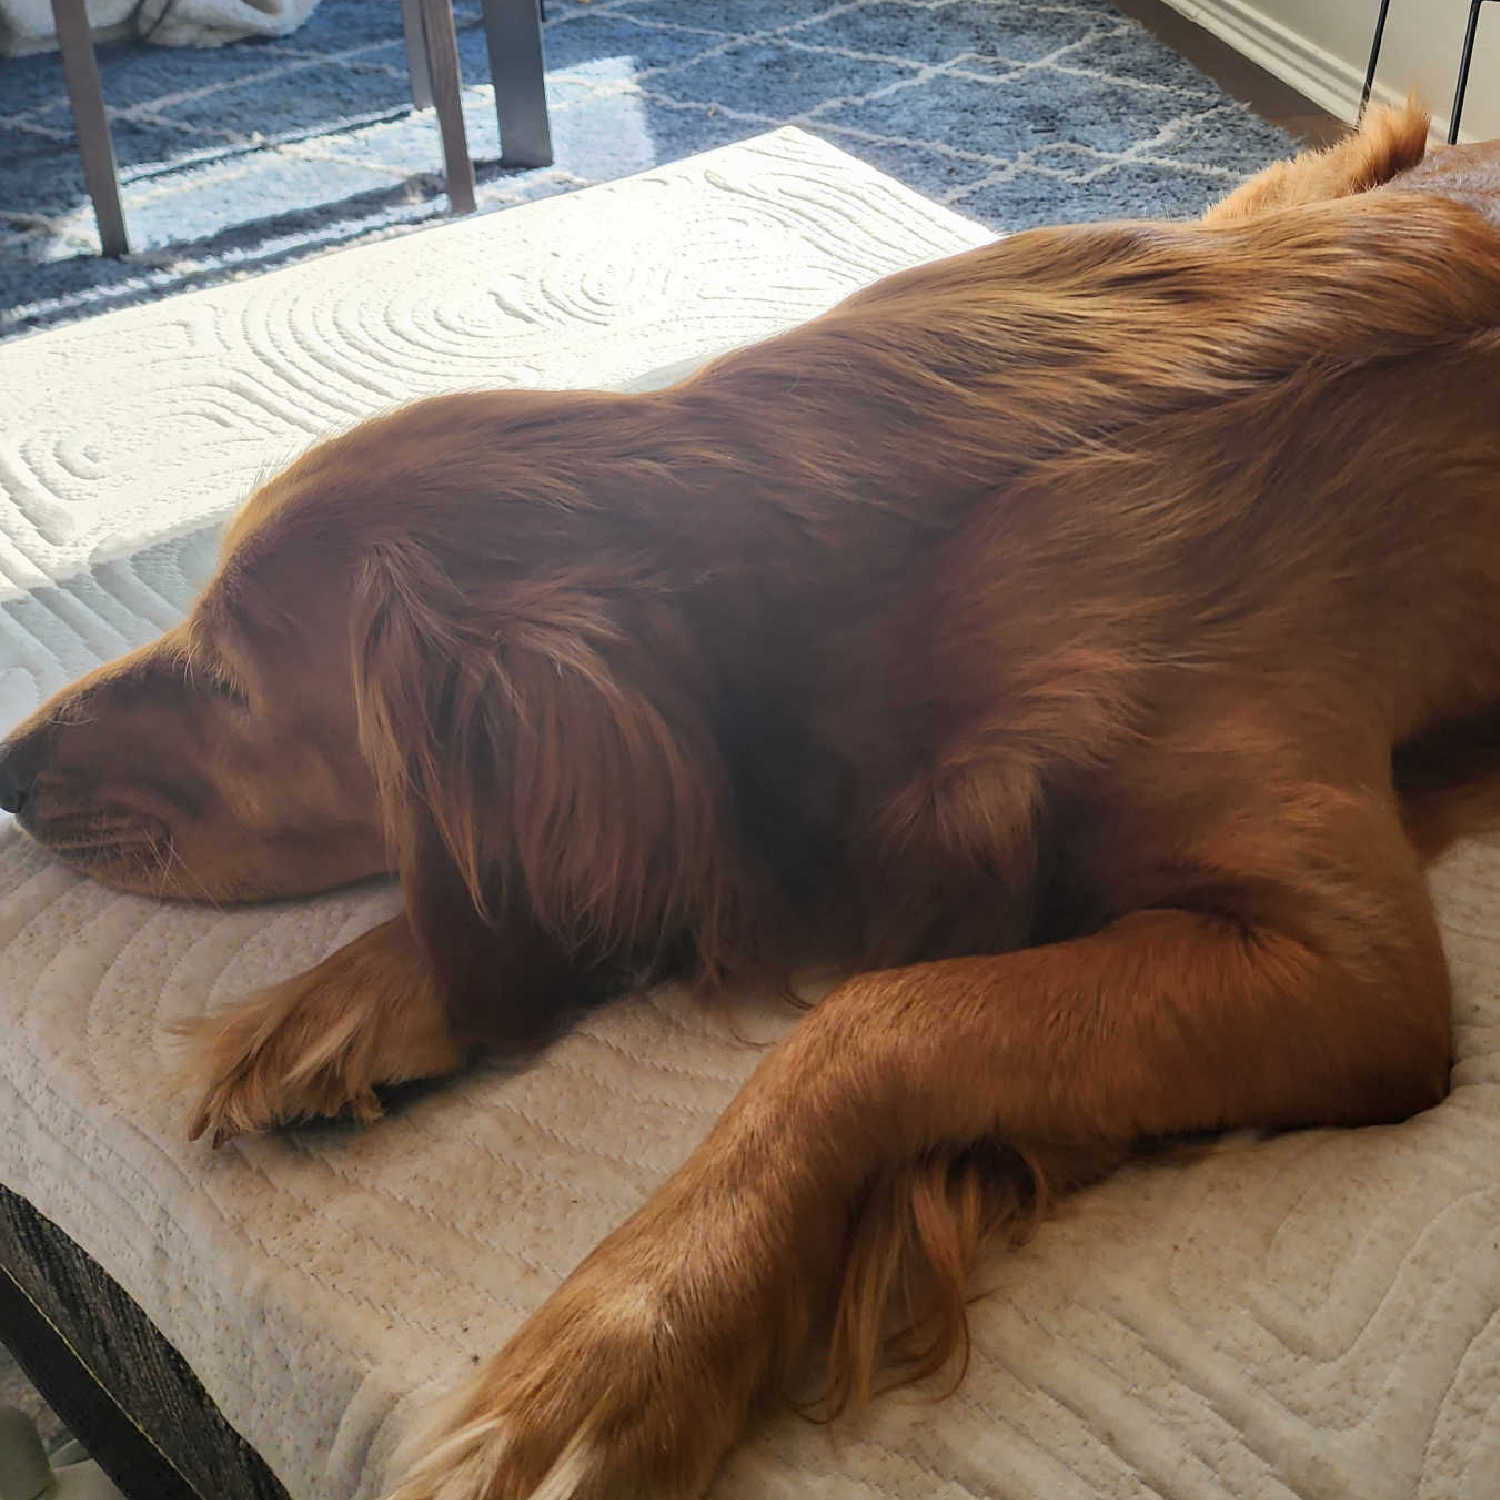 A sleepy and content dog napping on a CBDreamRx pet bed, which may contain CBD to help reduce separation anxiety in pets.